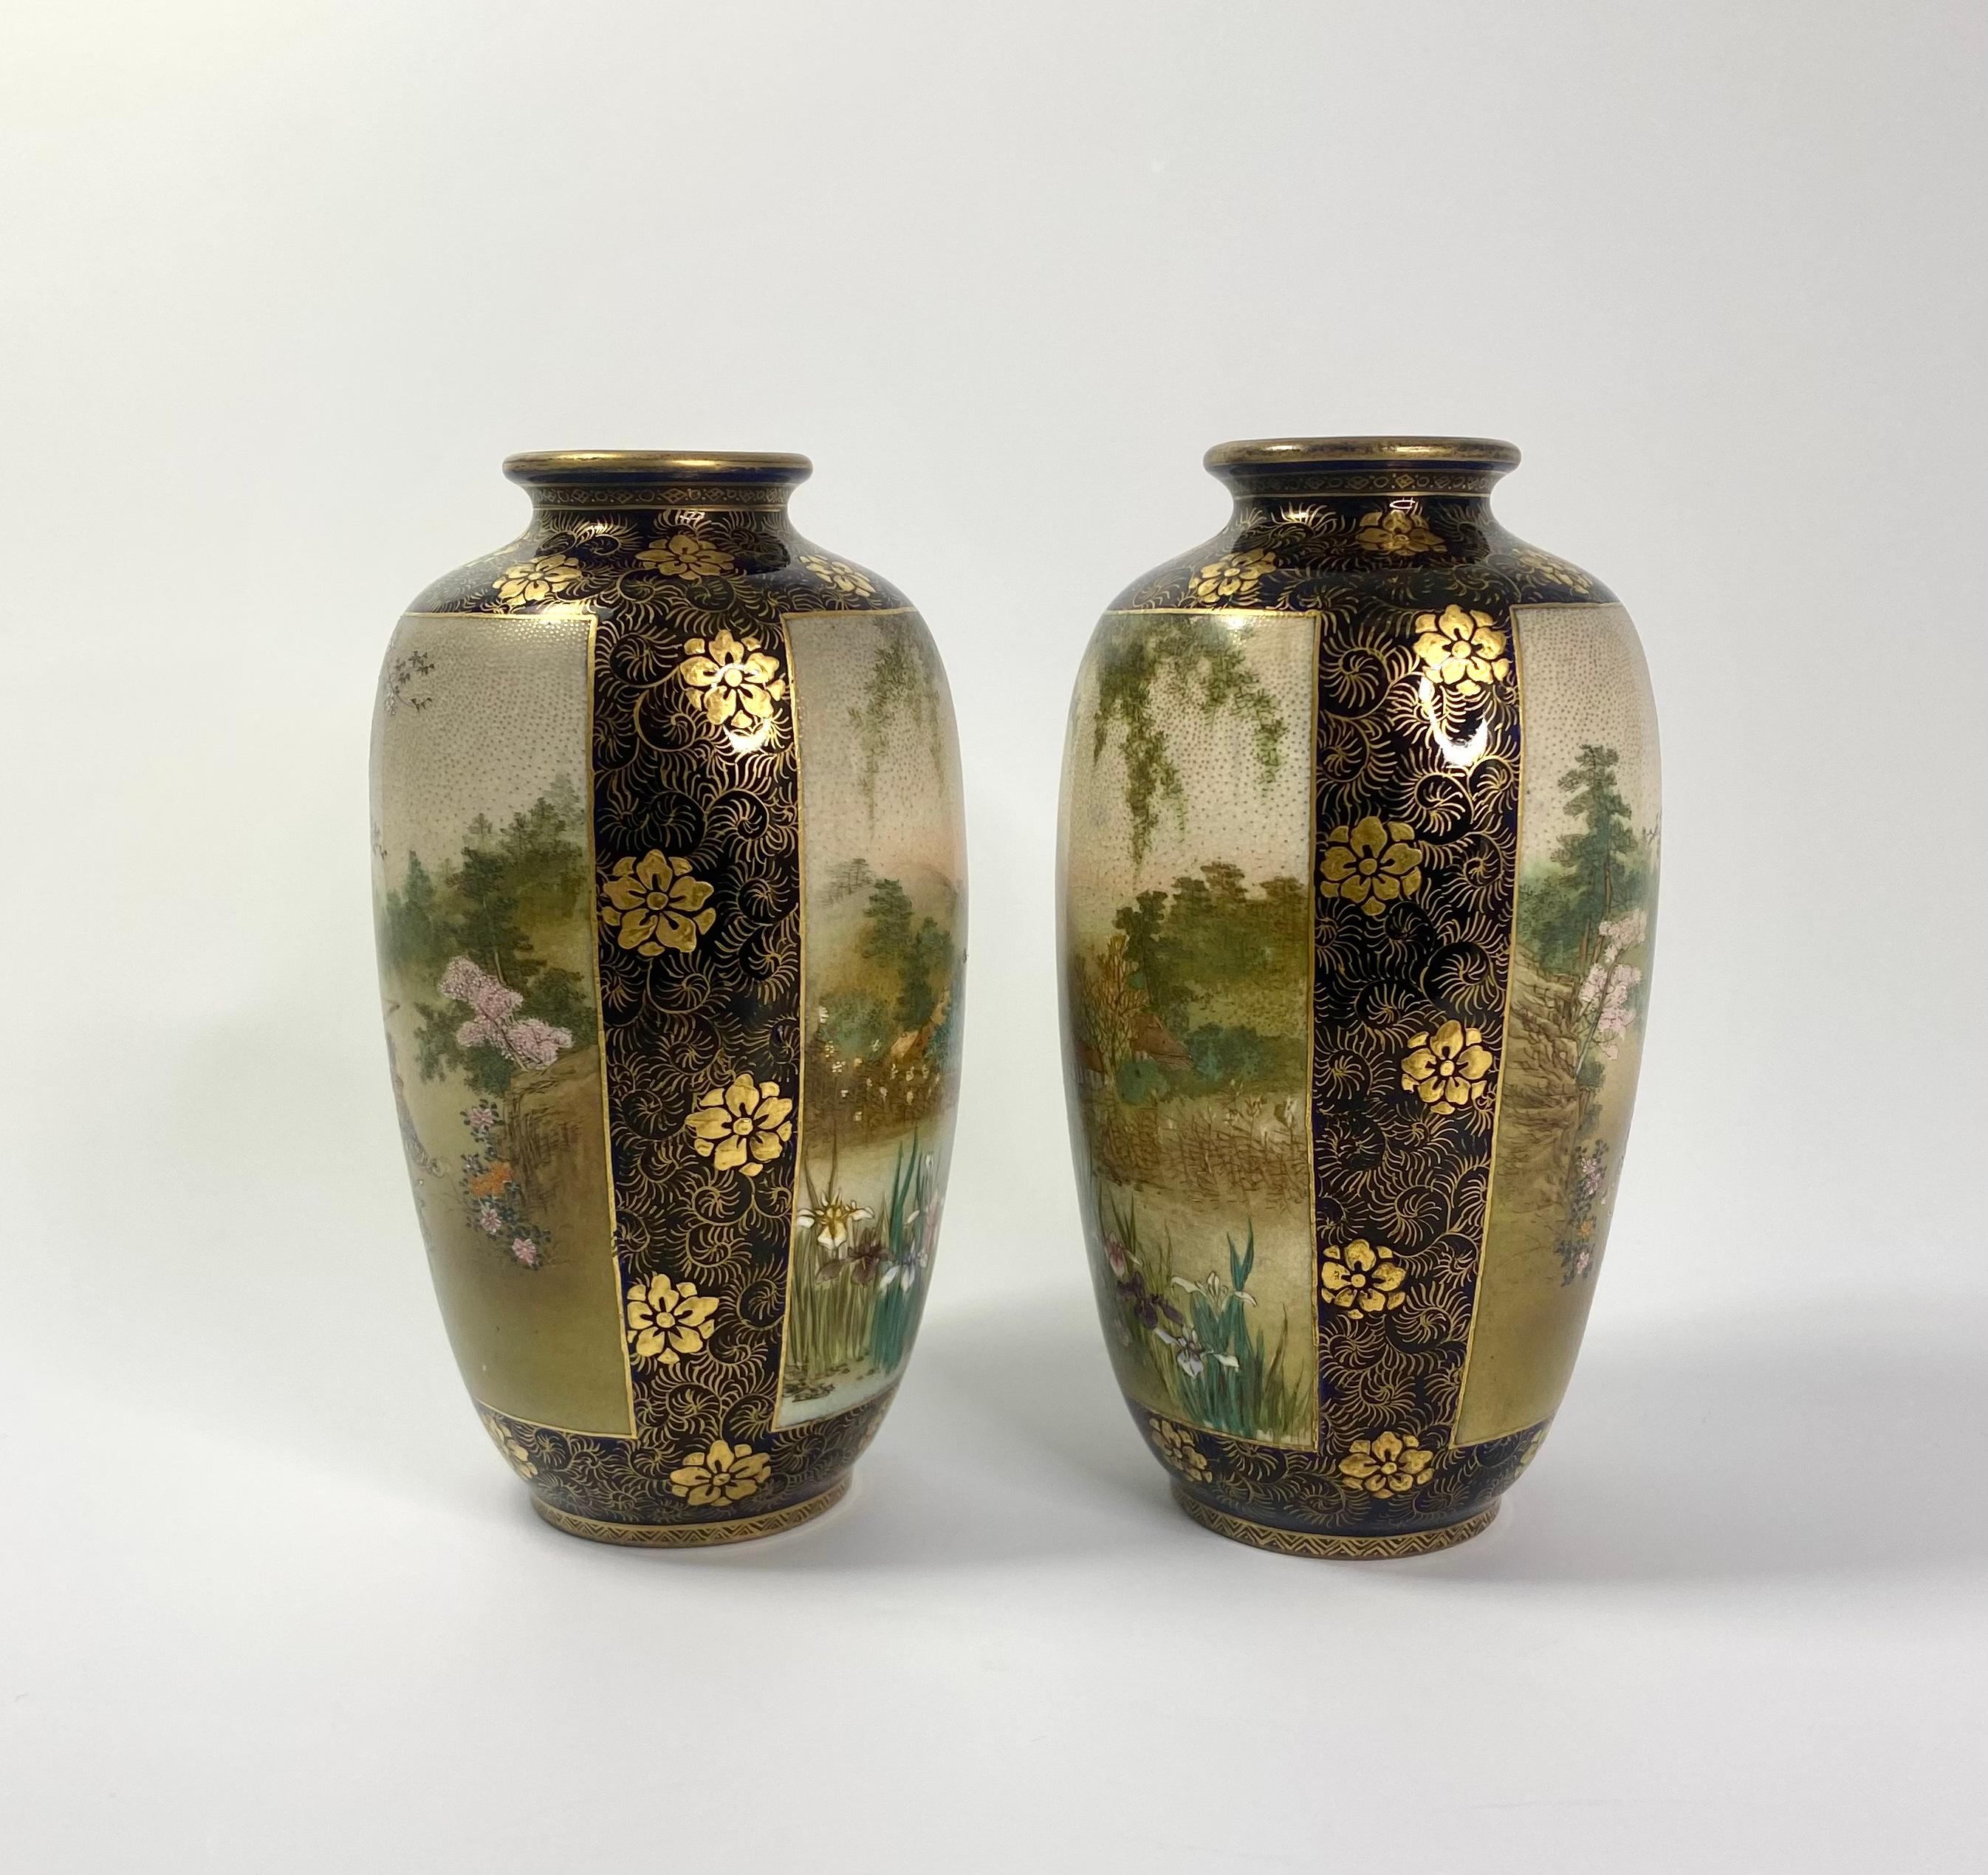 Pair of Satsuma pottery vases, Kinkozan, c. 1900. Meiji Period. Both vases, well painted with panels of Samurai riding horses, with attendants, beneath blossoming prunus trees. The reverse of the vases, painted with further panels of pavilions on a